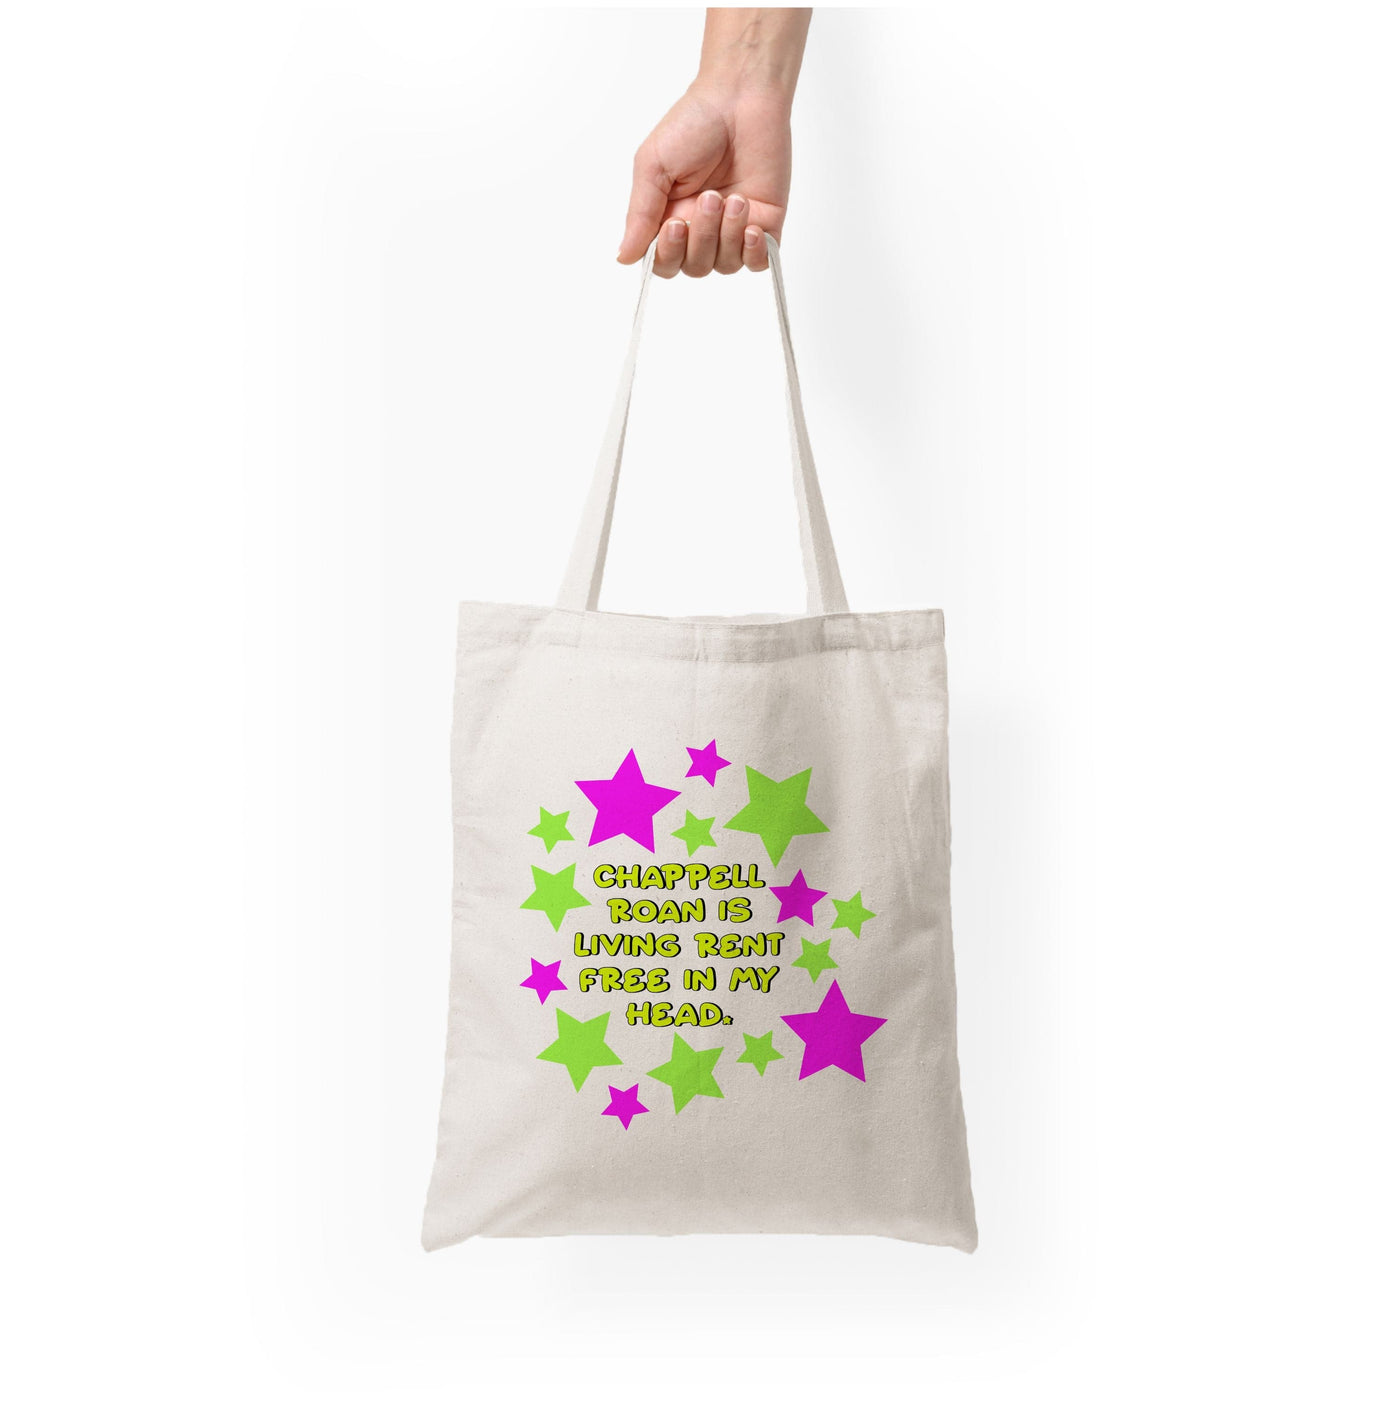 Chappell Roan Rent Free In My Head Tote Bag